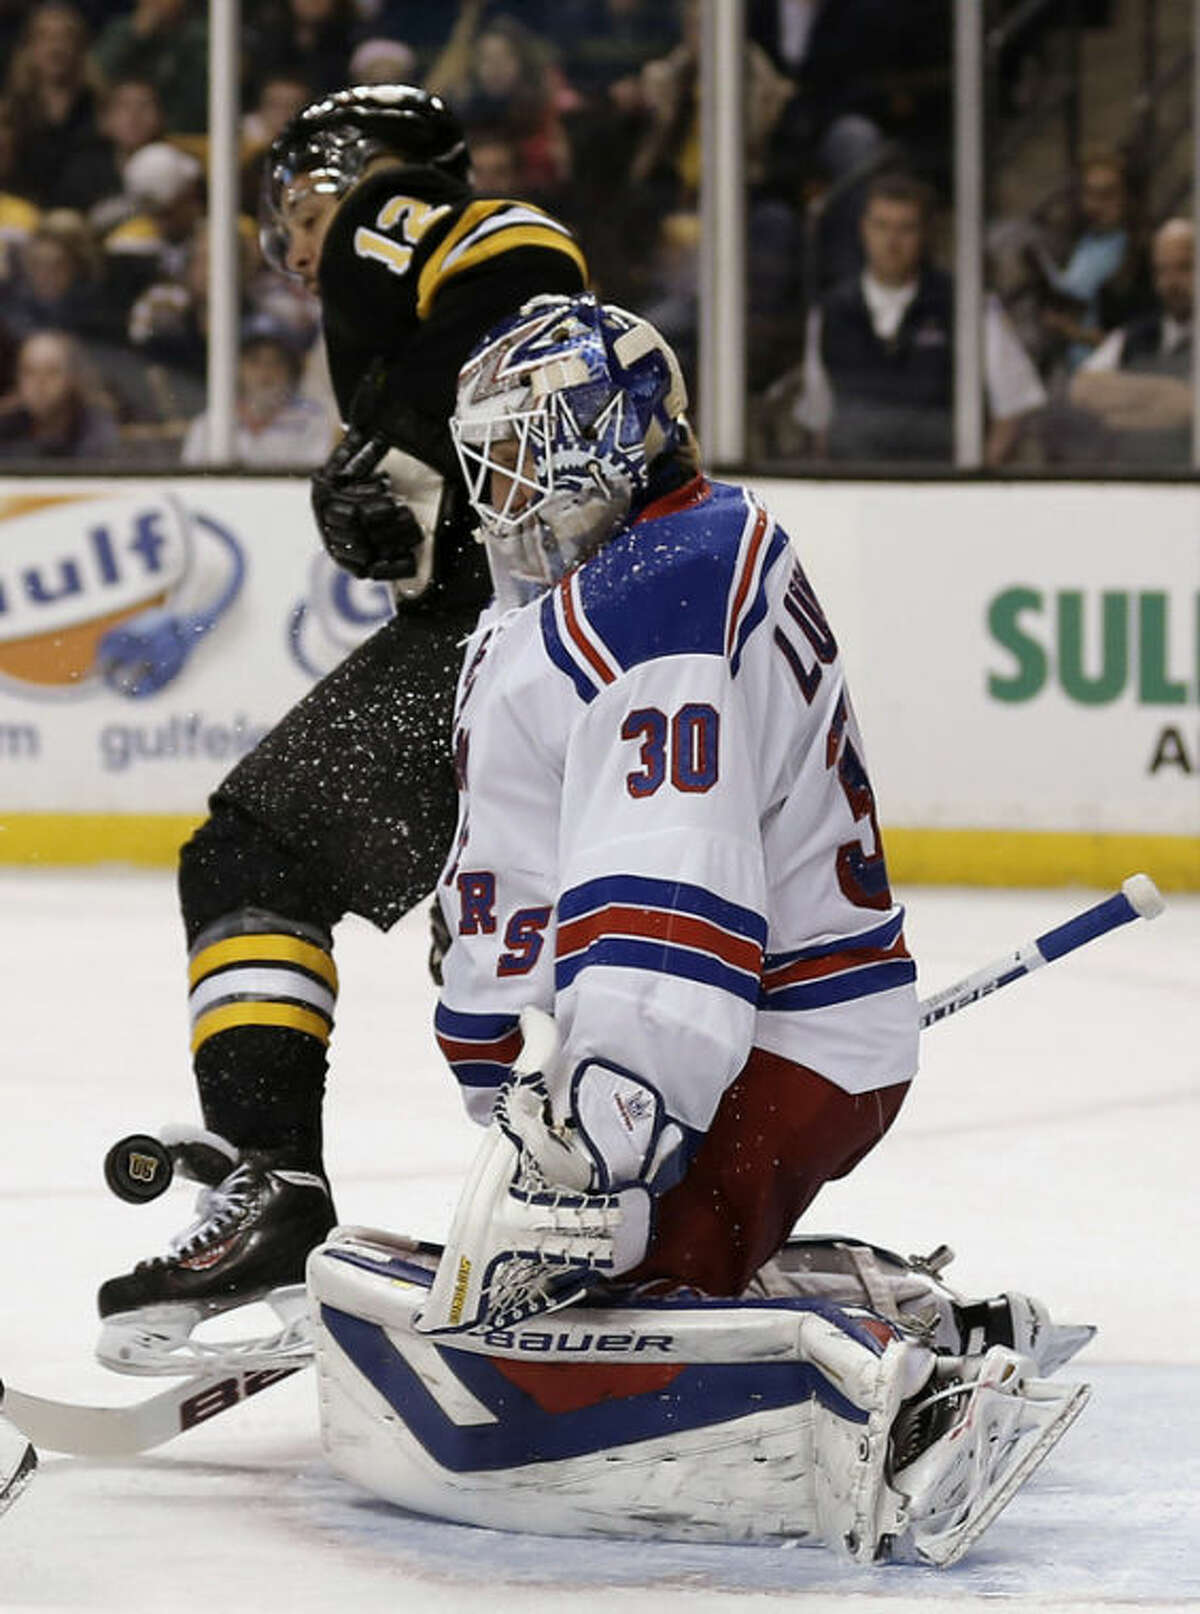 New York Rangers goalie Henrik Lundqvist (30) makes a save as Boston Bruins' Jarome Iginla looks for the rebound during the second period of an NHL hockey game in Boston, Friday, Nov. 29, 2013. (AP Photo/Winslow Townson)